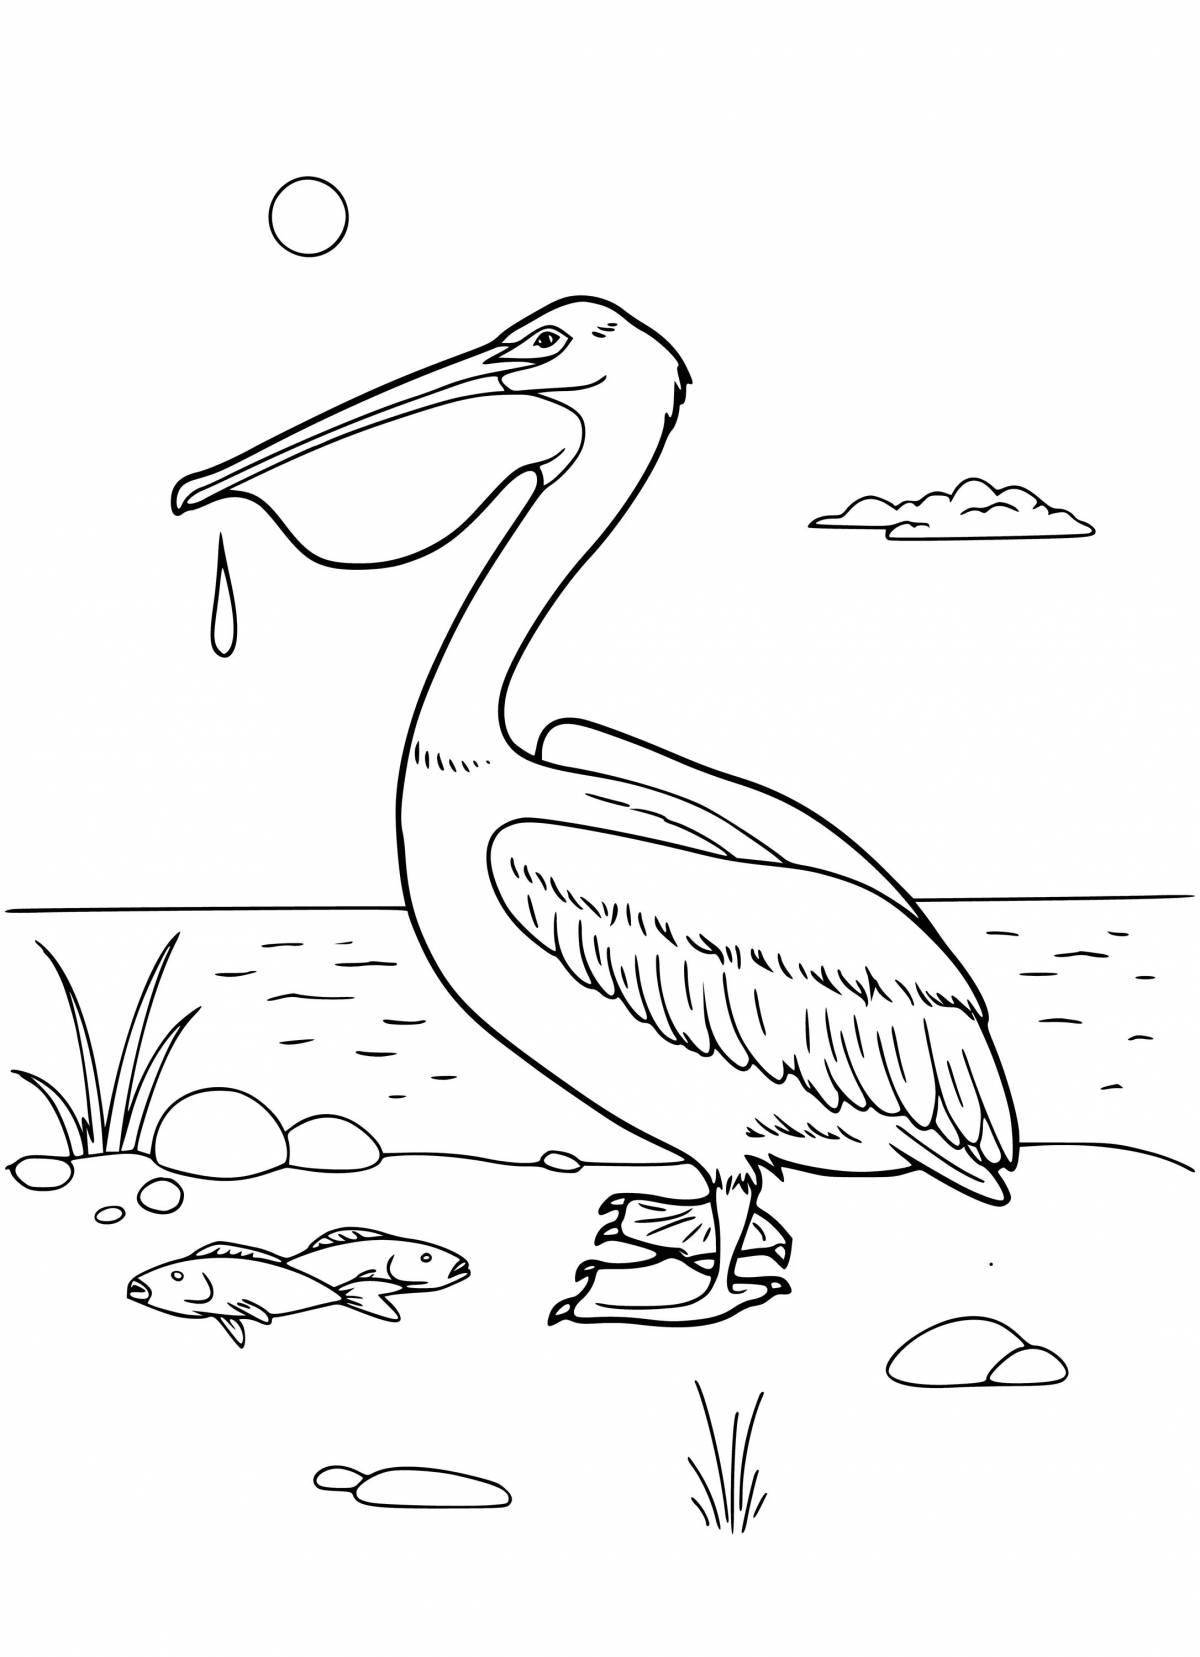 Colourful pelican coloring book for kids